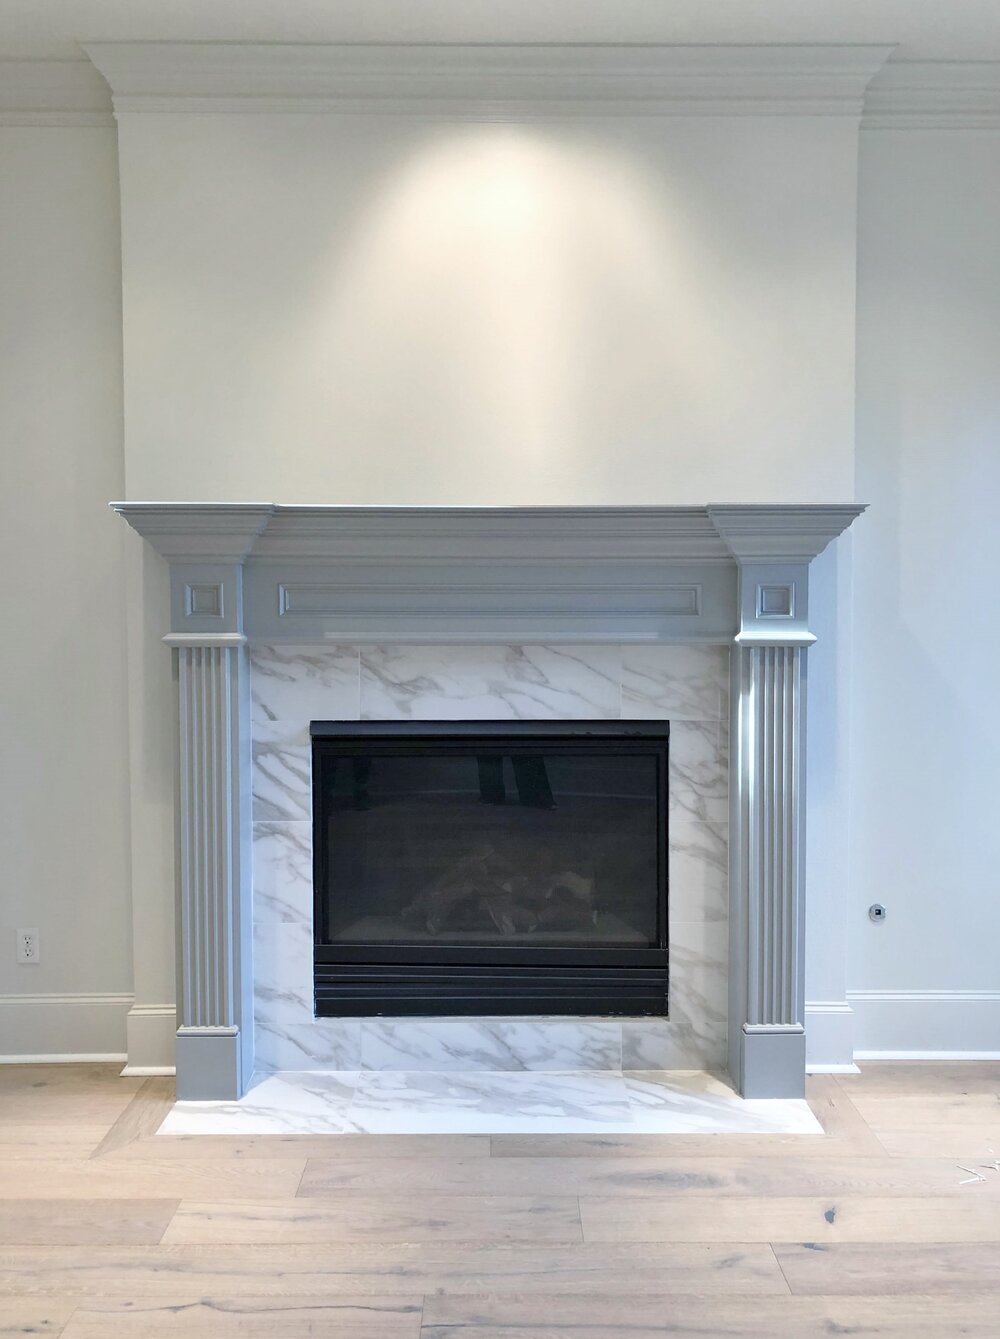 Fireplace Remodel, How To Change Tile Fireplace Surround